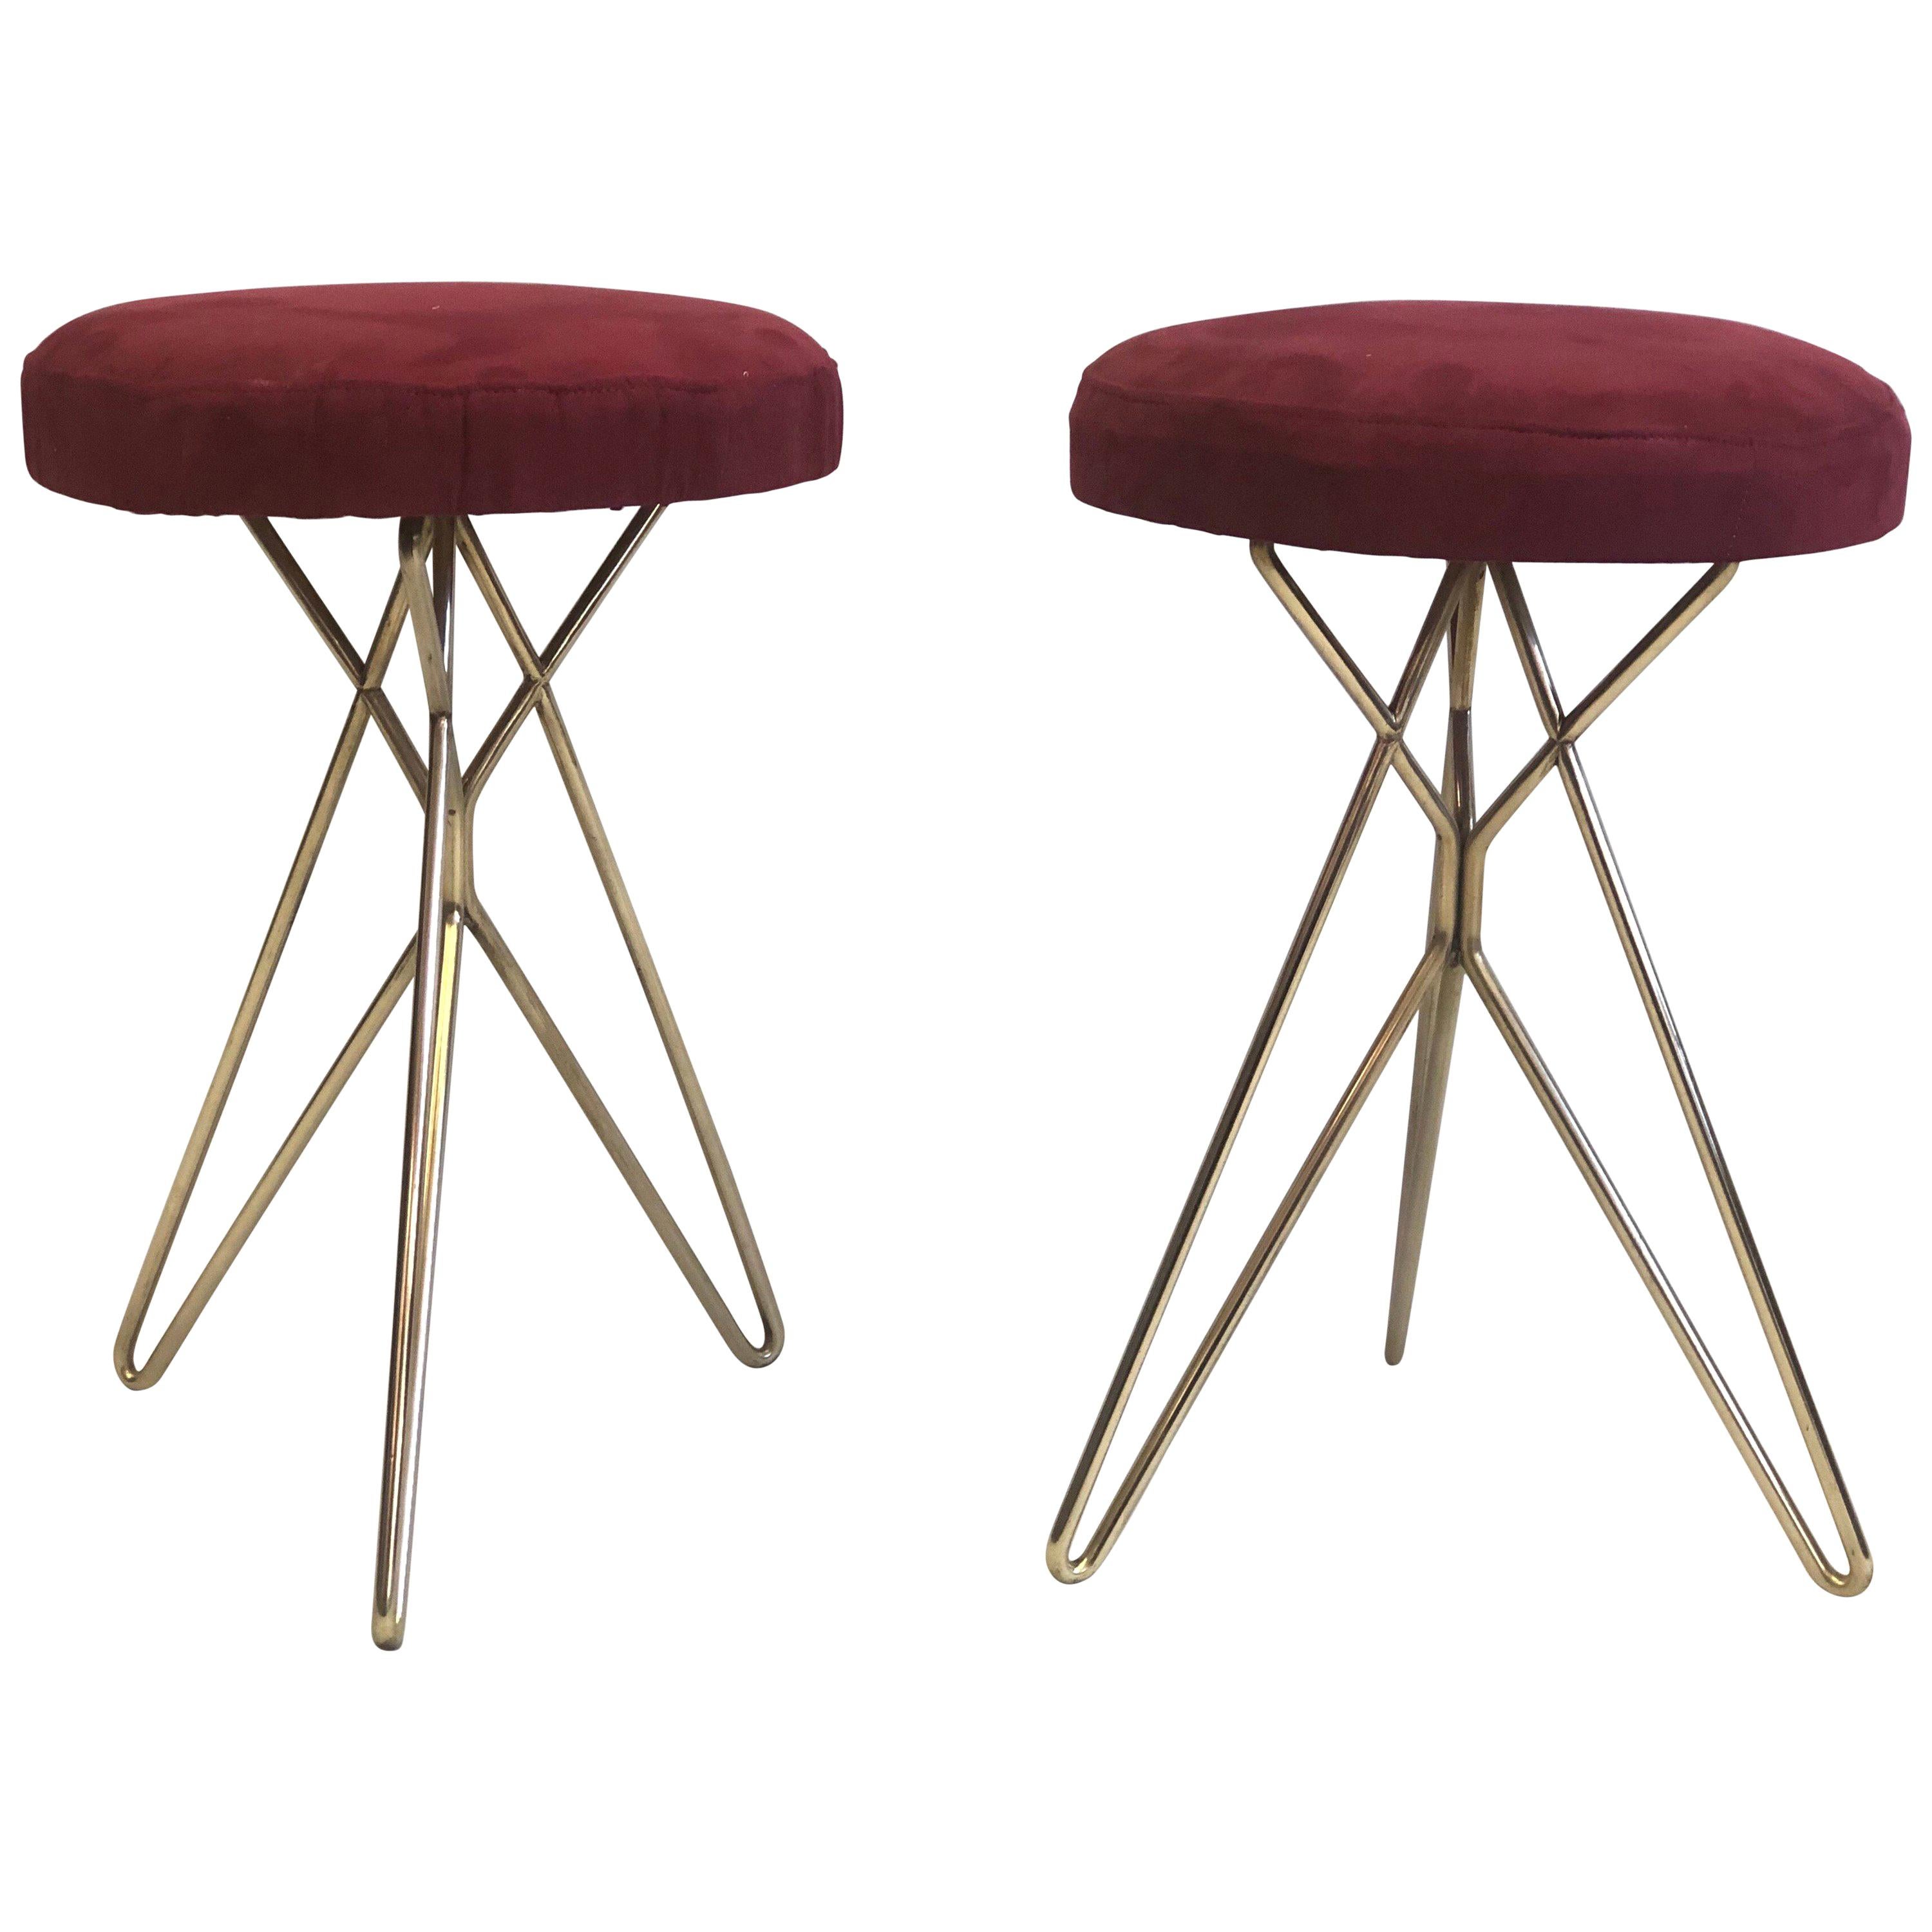 Pair of Italian Midcentury Brass Stools Attributed to Ico Parisi, 1952 For Sale